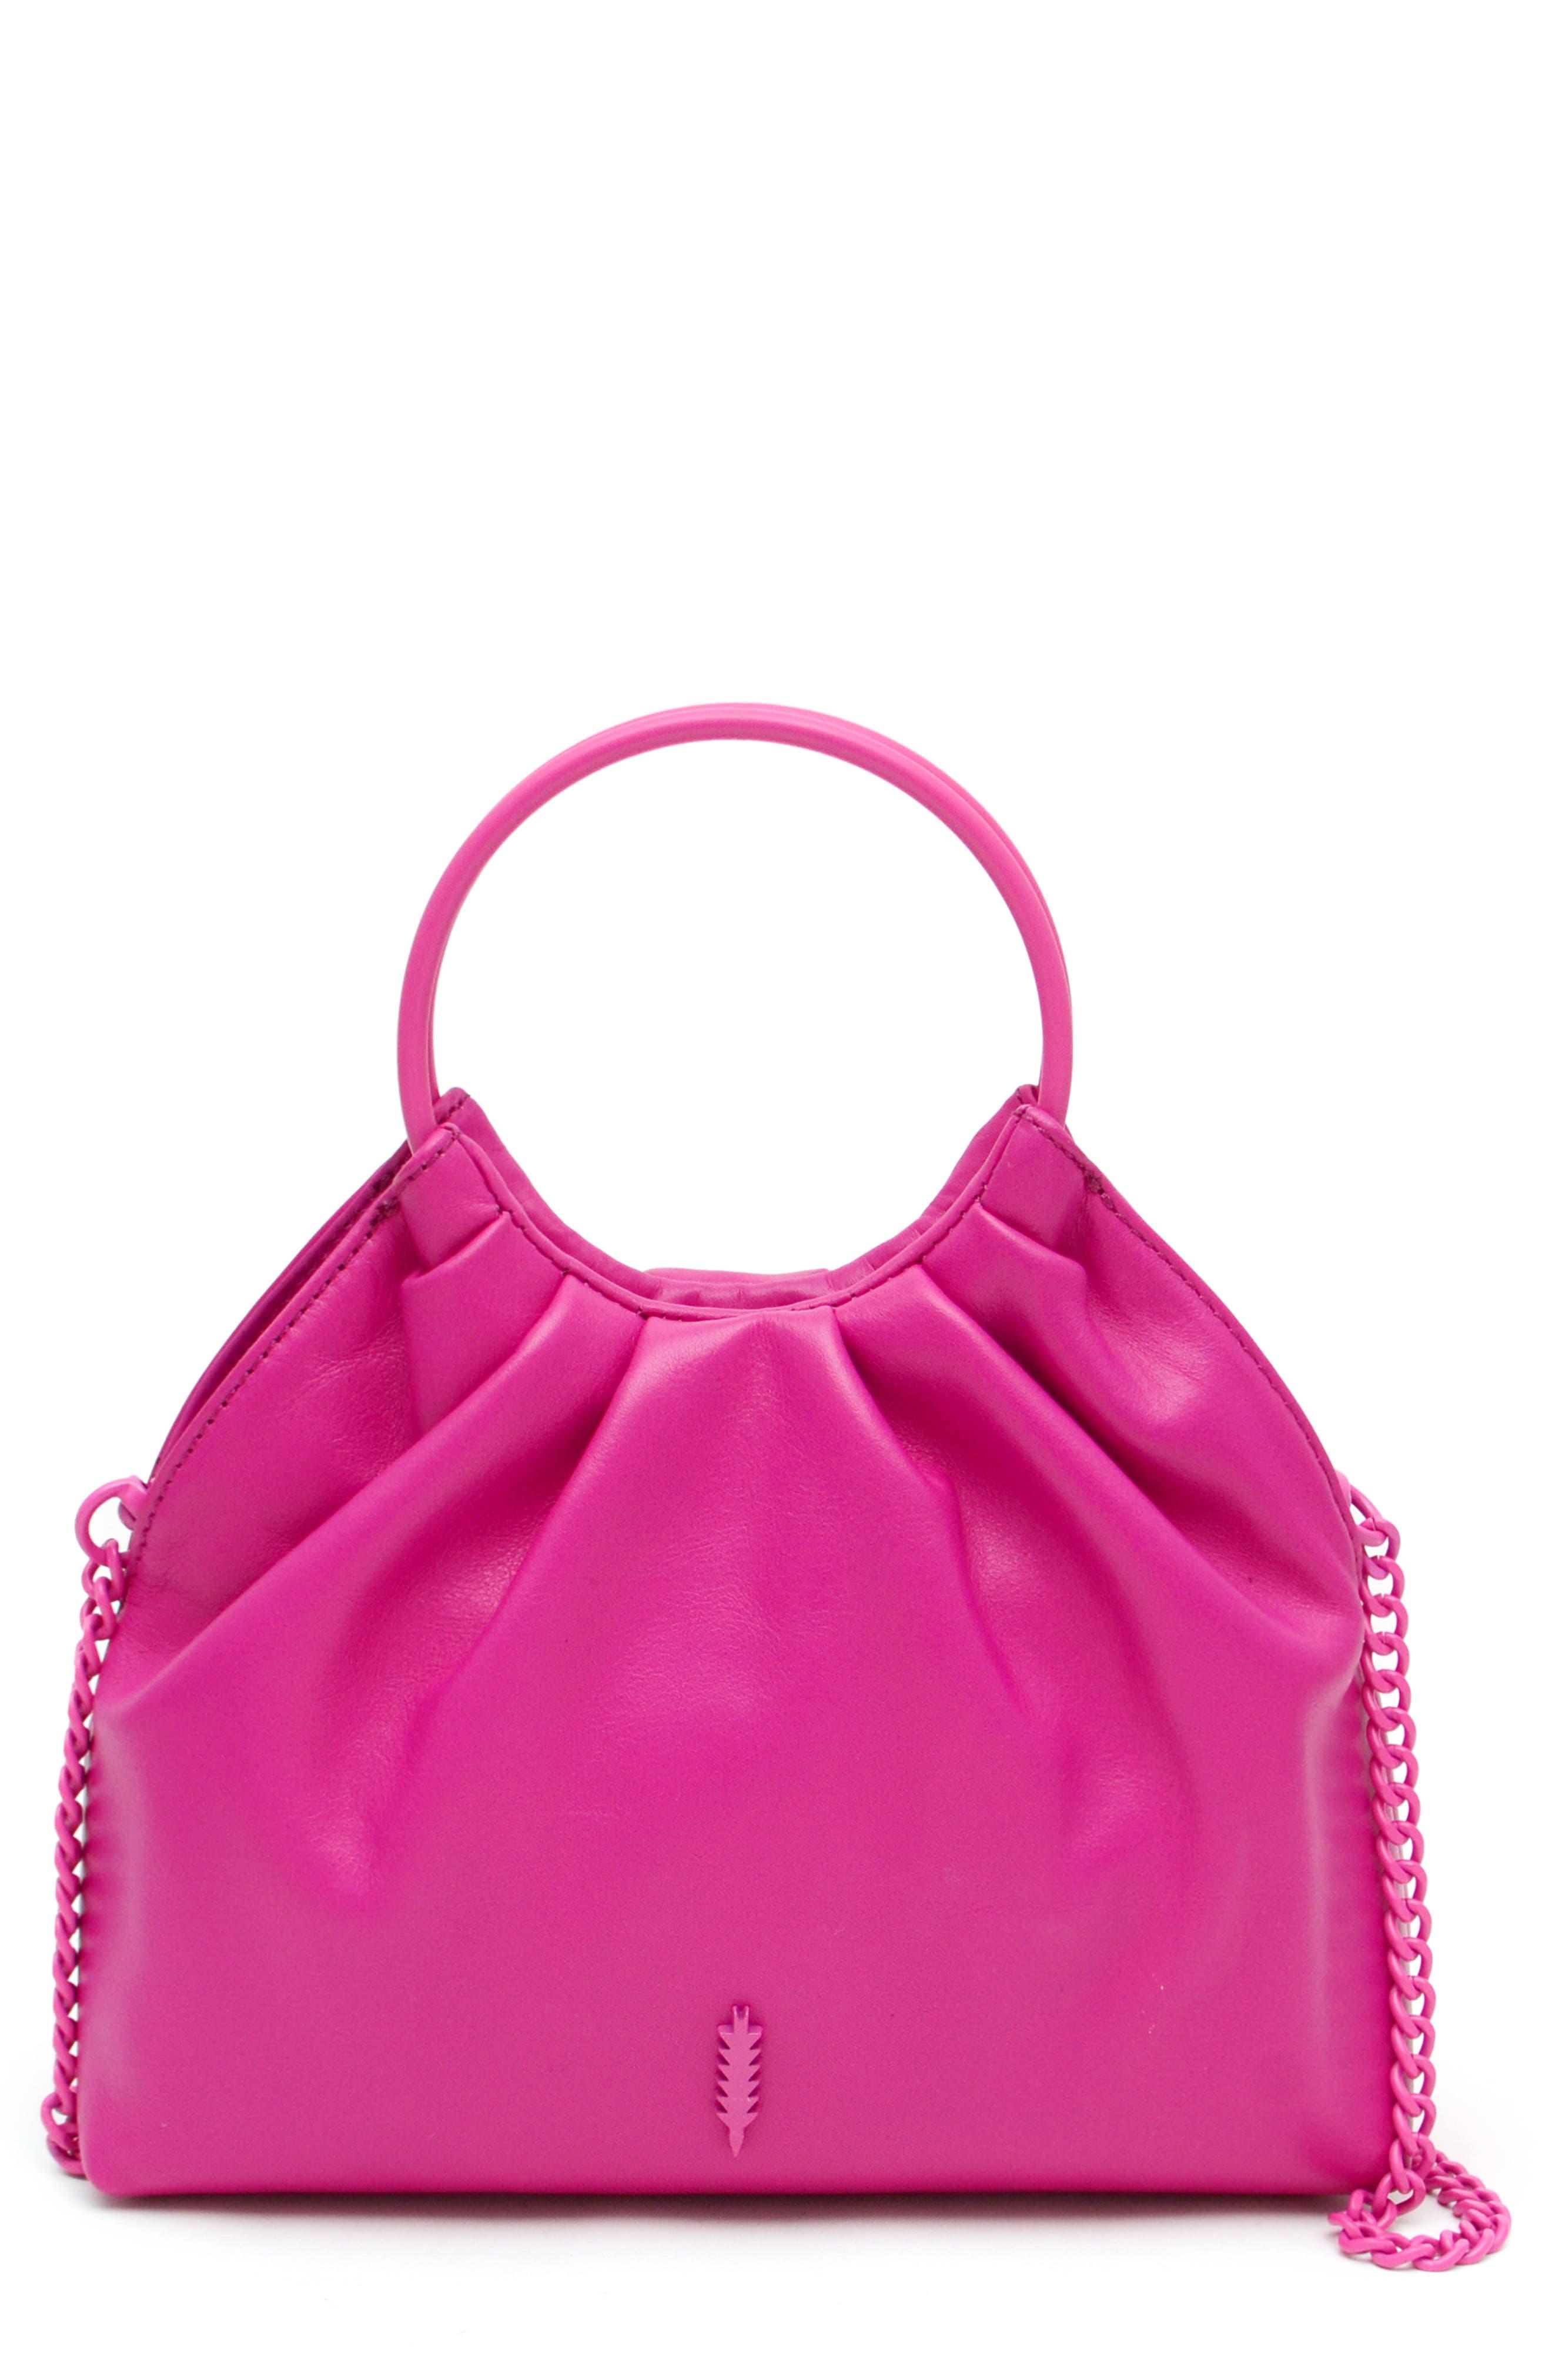 thacker Kara Leather Crossbody Bag In Orchid At Nordstrom Rack in Pink